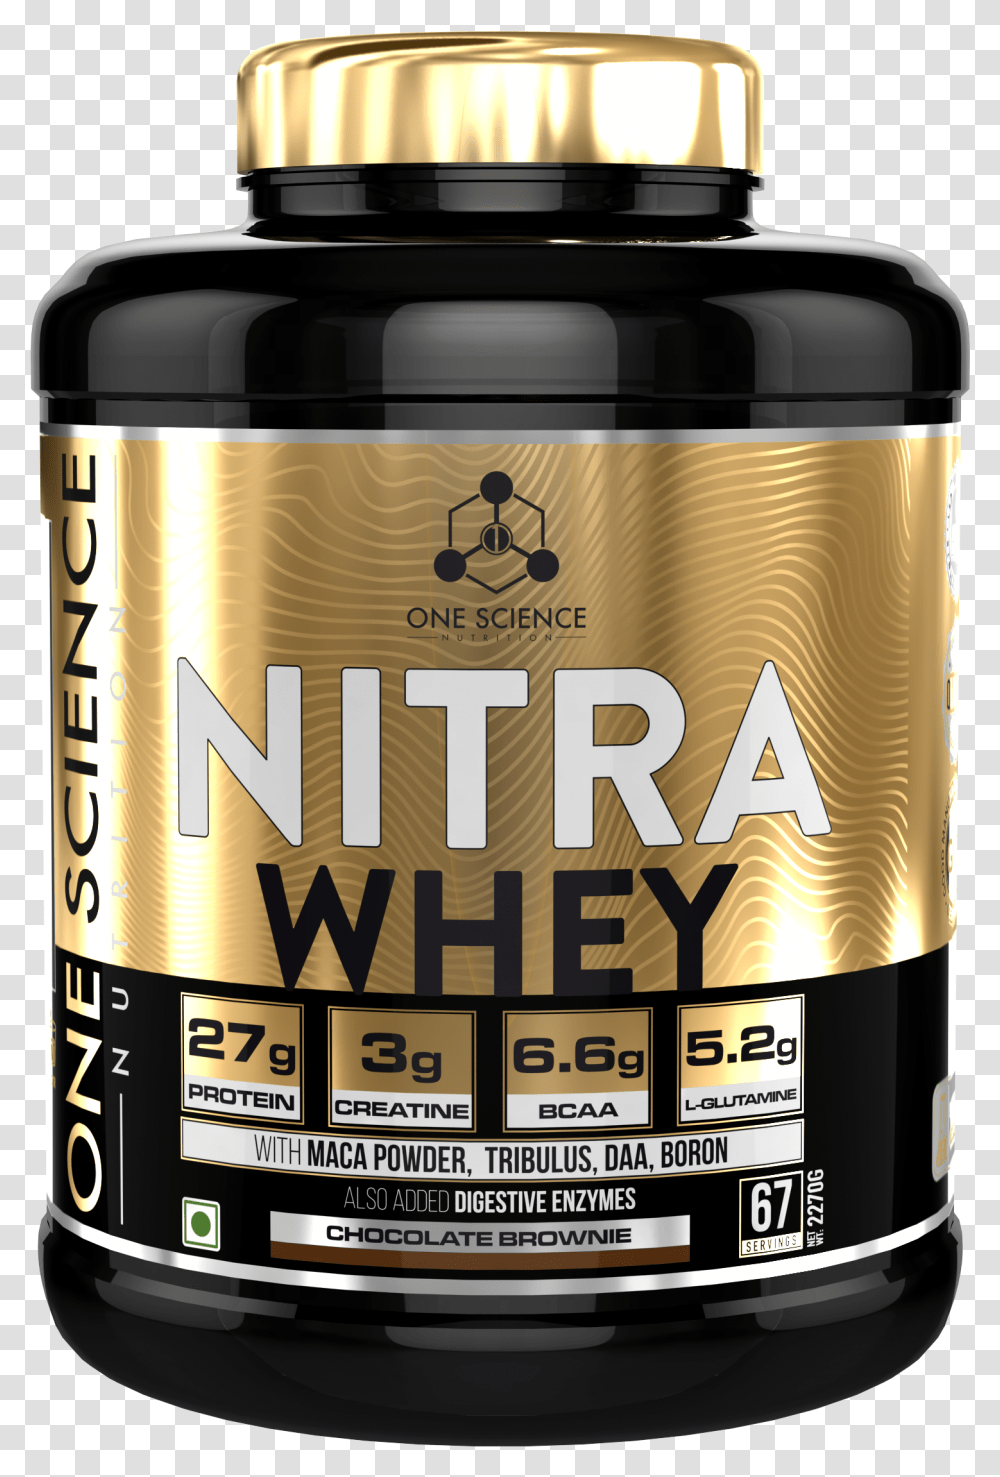 One Science Whey Protein, Label, Alcohol, Beverage Transparent Png